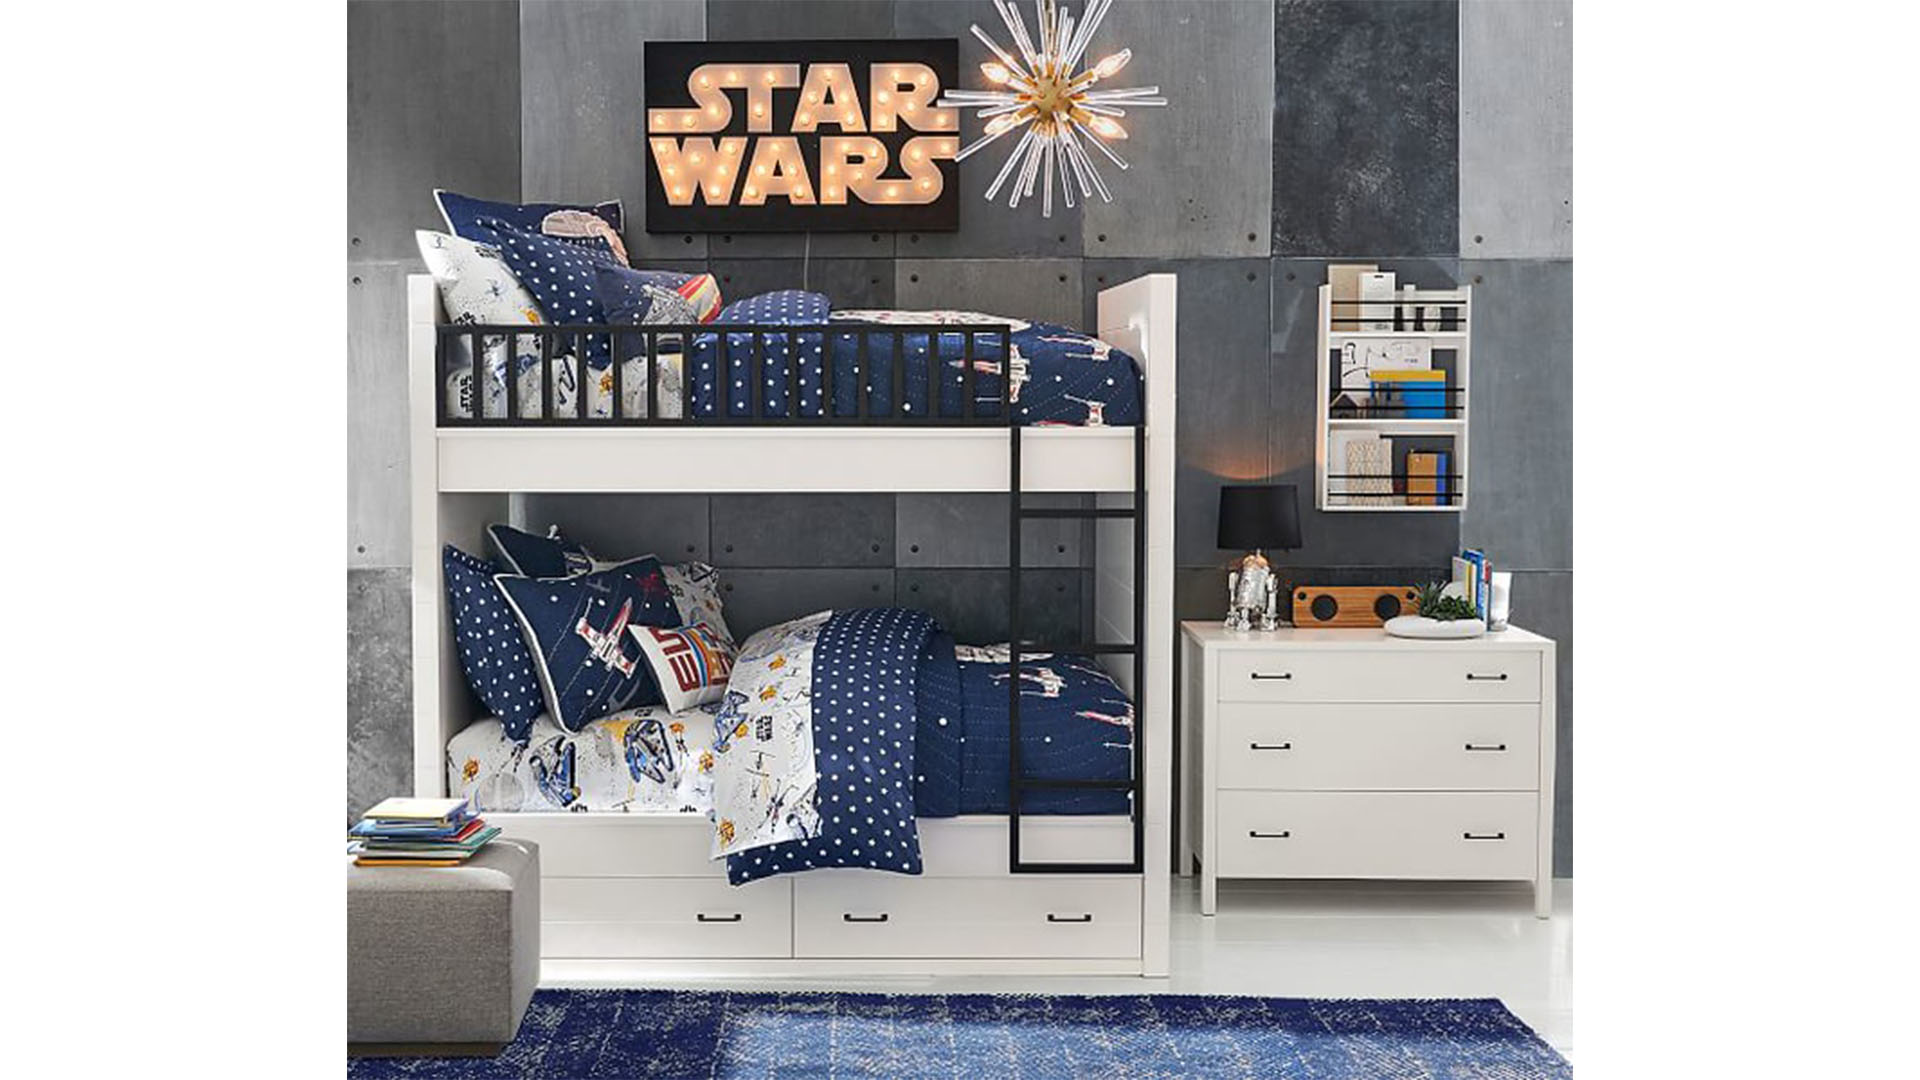 A bedroom decorated with Star Wars items, including a neon 